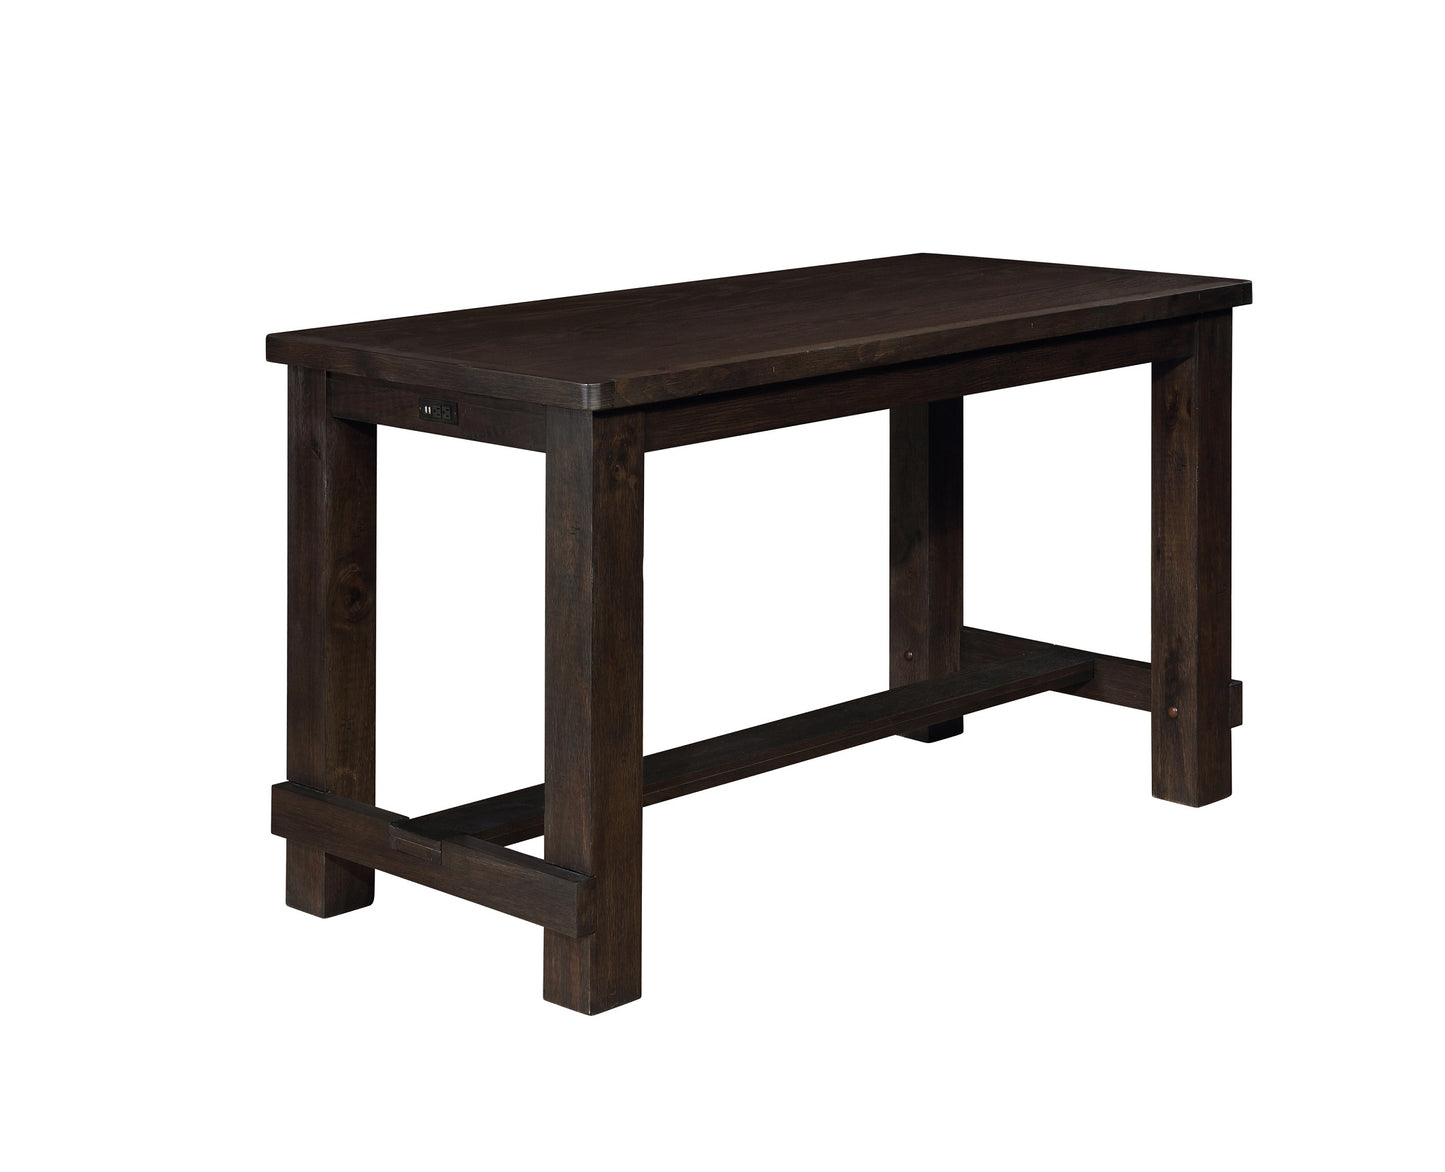 Kessel Brown Brushed Wood Counter Height Dining Table